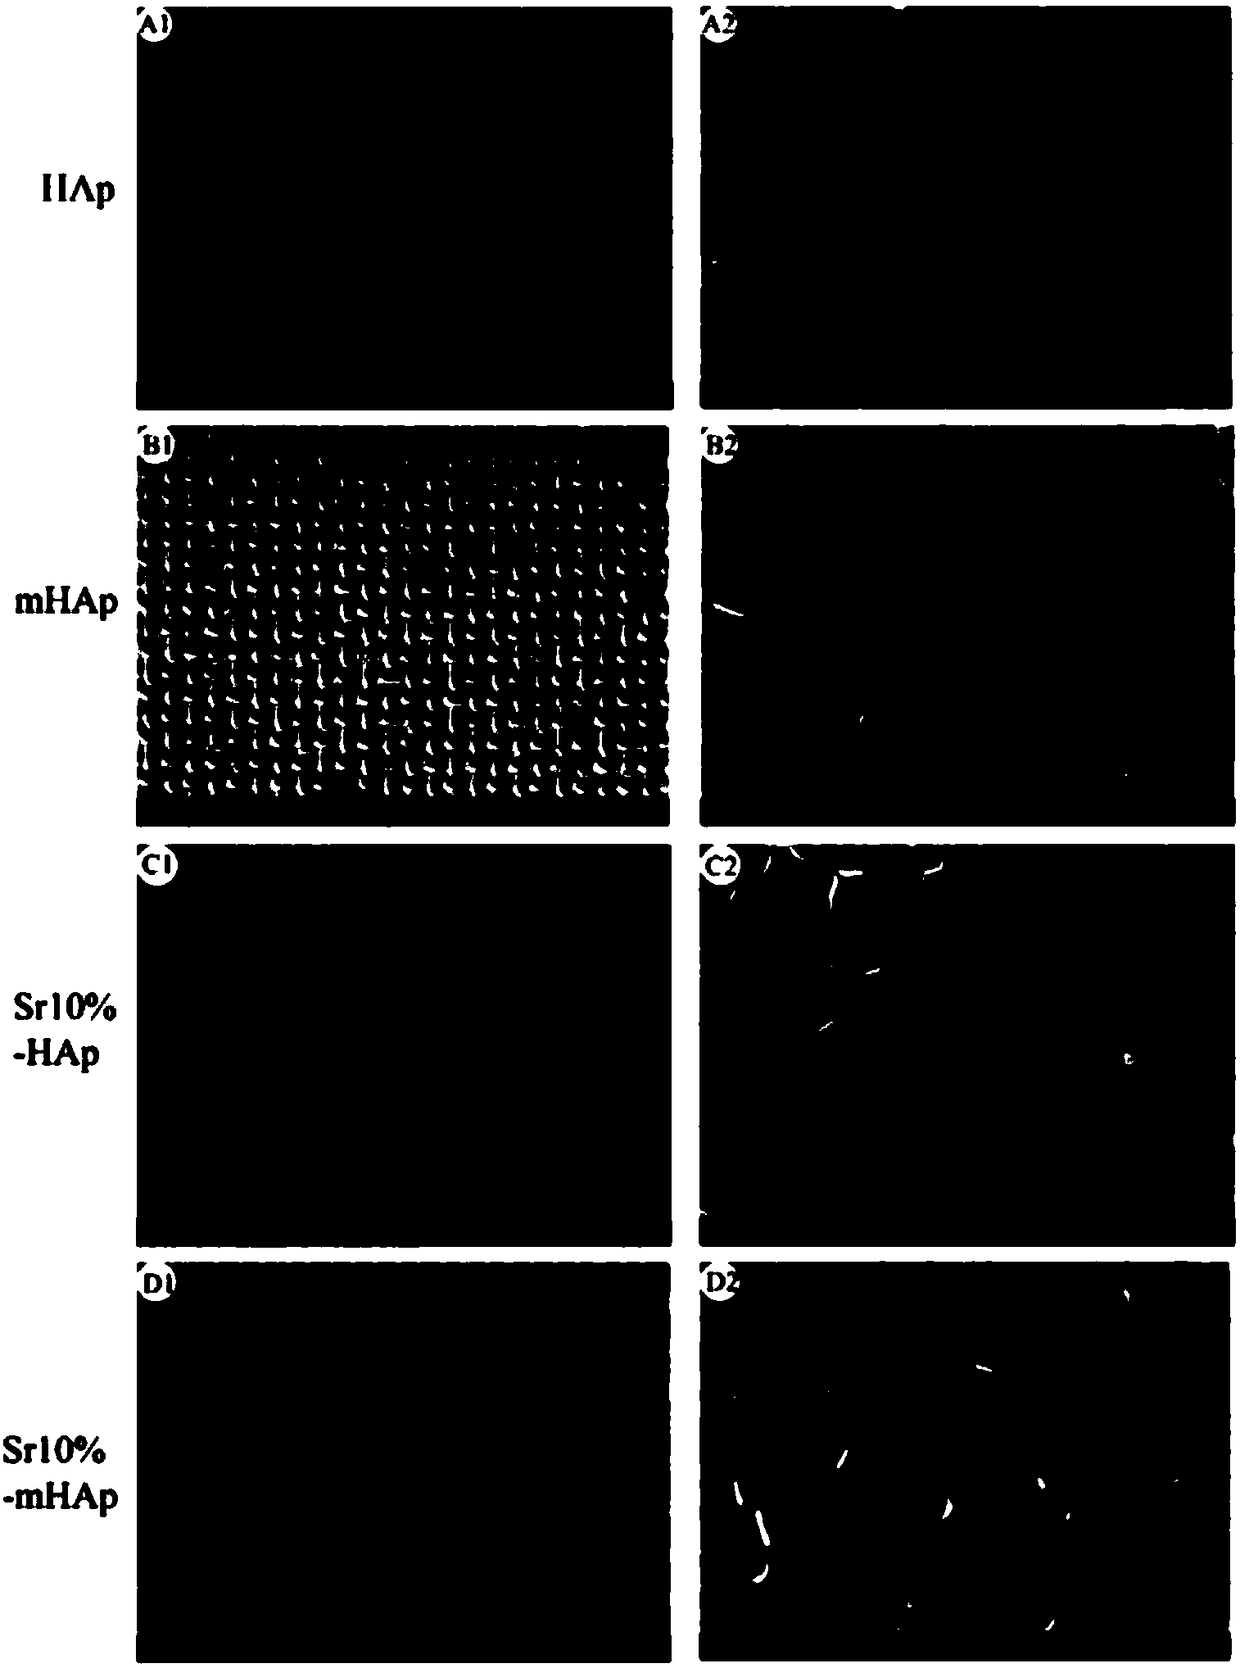 Preparation method of hydroxyapatite biological ceramics with strontium cooperated with ordered micrometer structure for osteogenesis